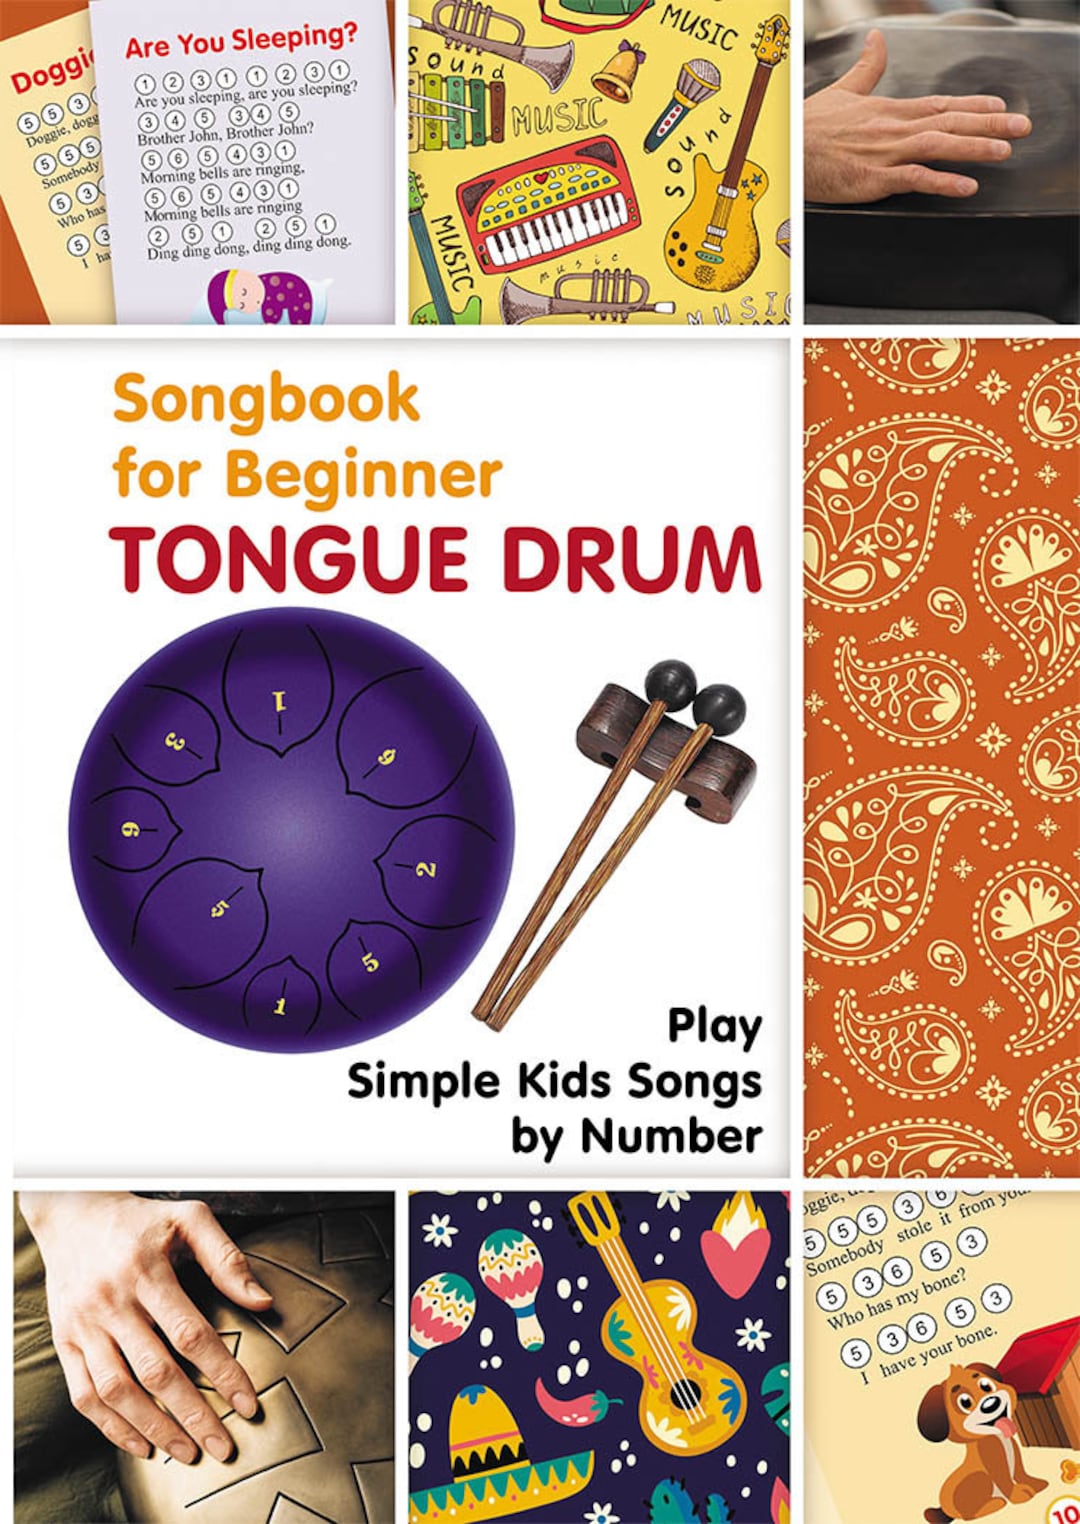 Tongue Drum Songbook for Beginner: Play Simple Kids Songs by Number e-book  numérique -  France